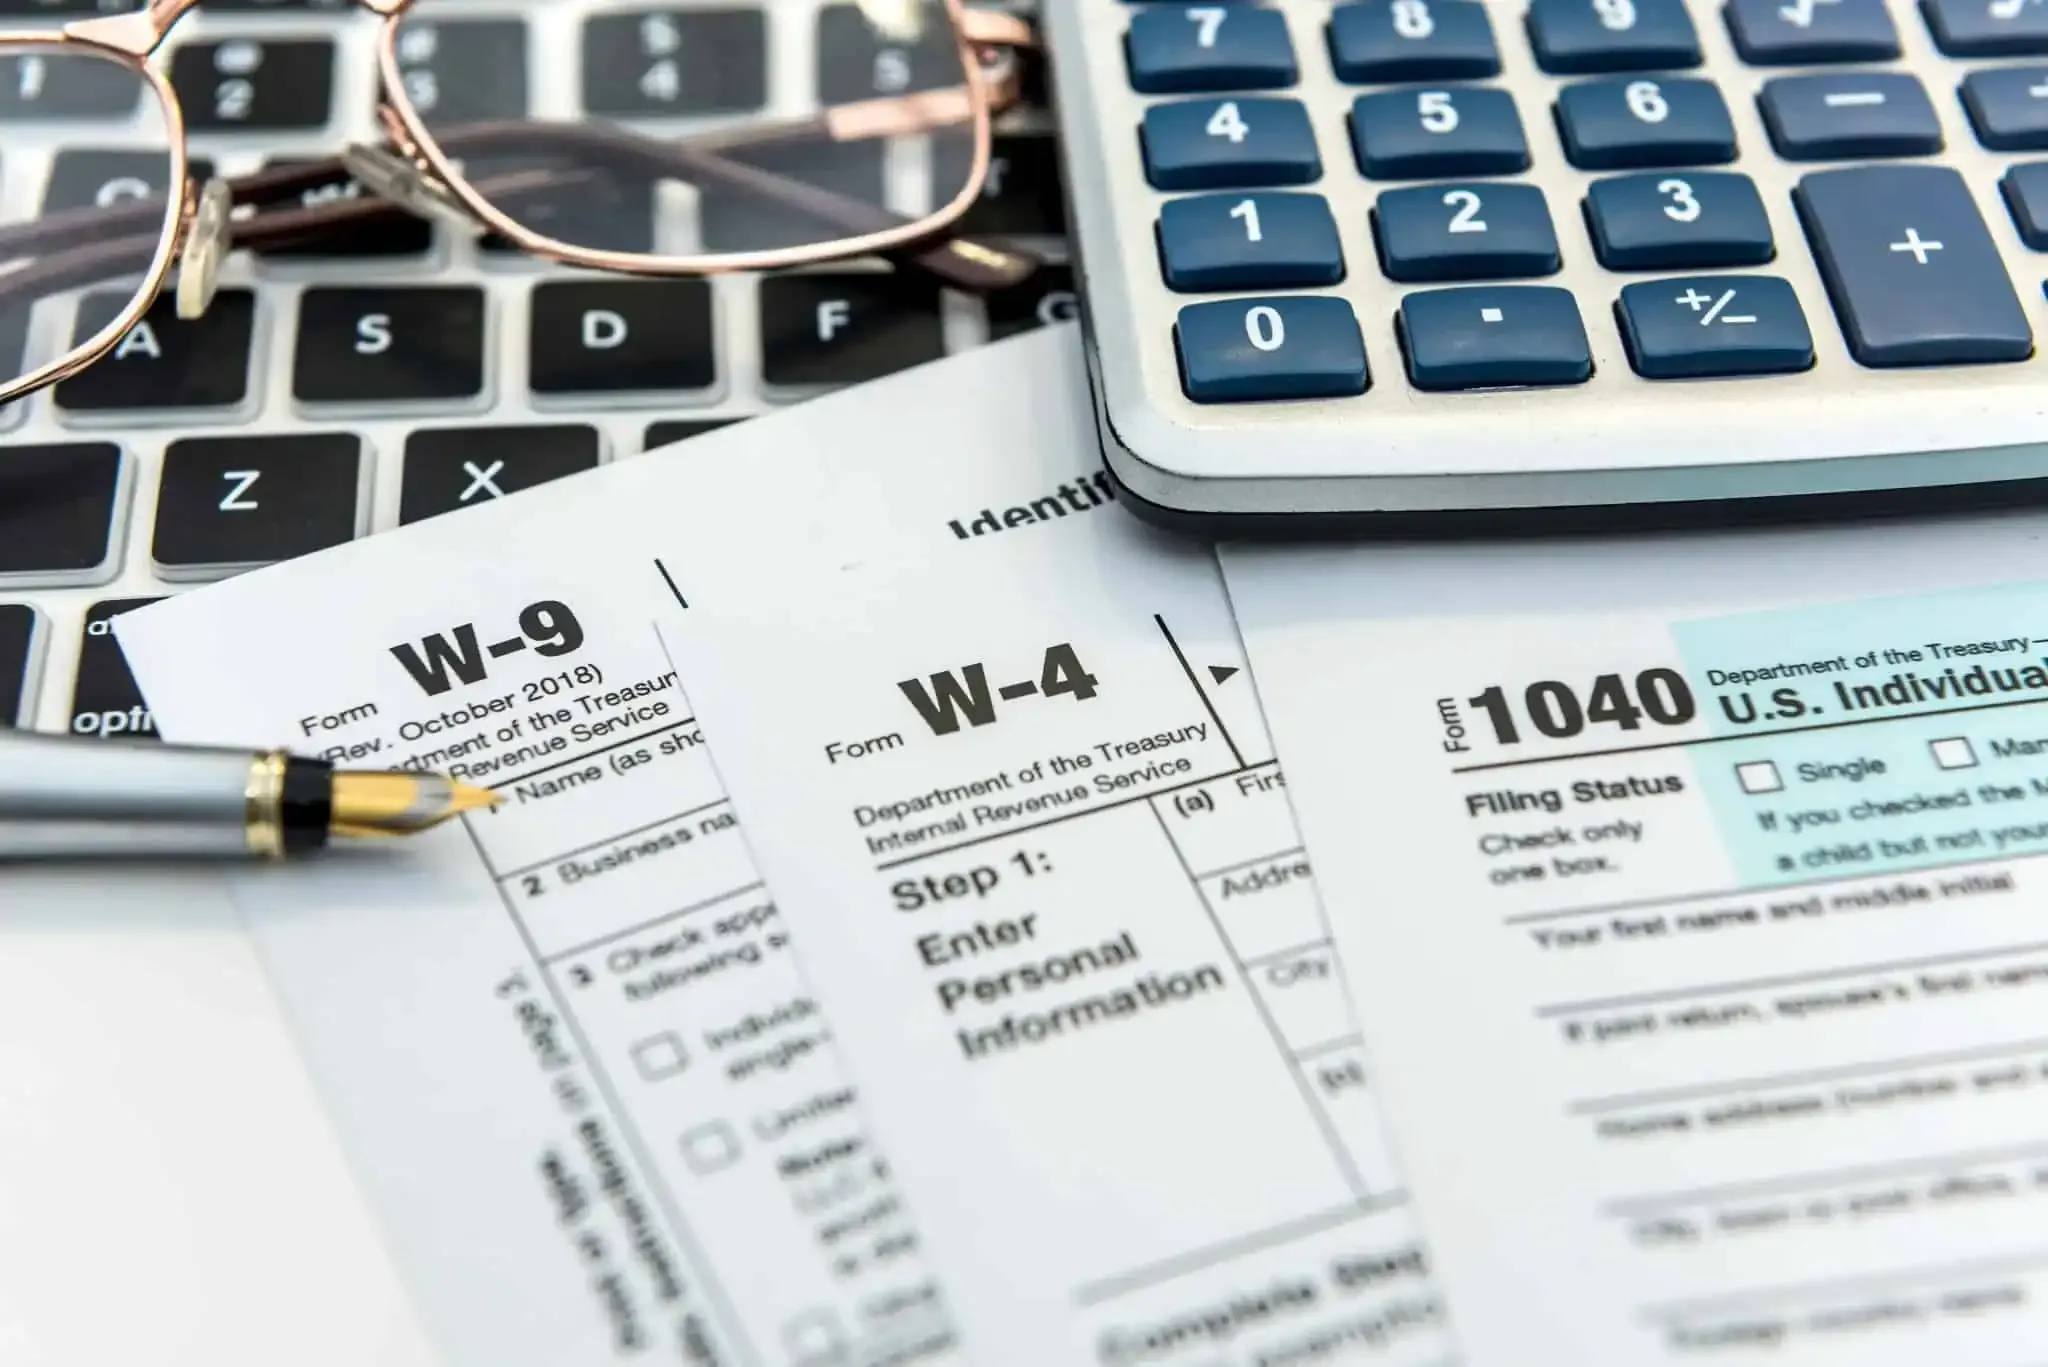 Tax documents by a keyboard and calculator